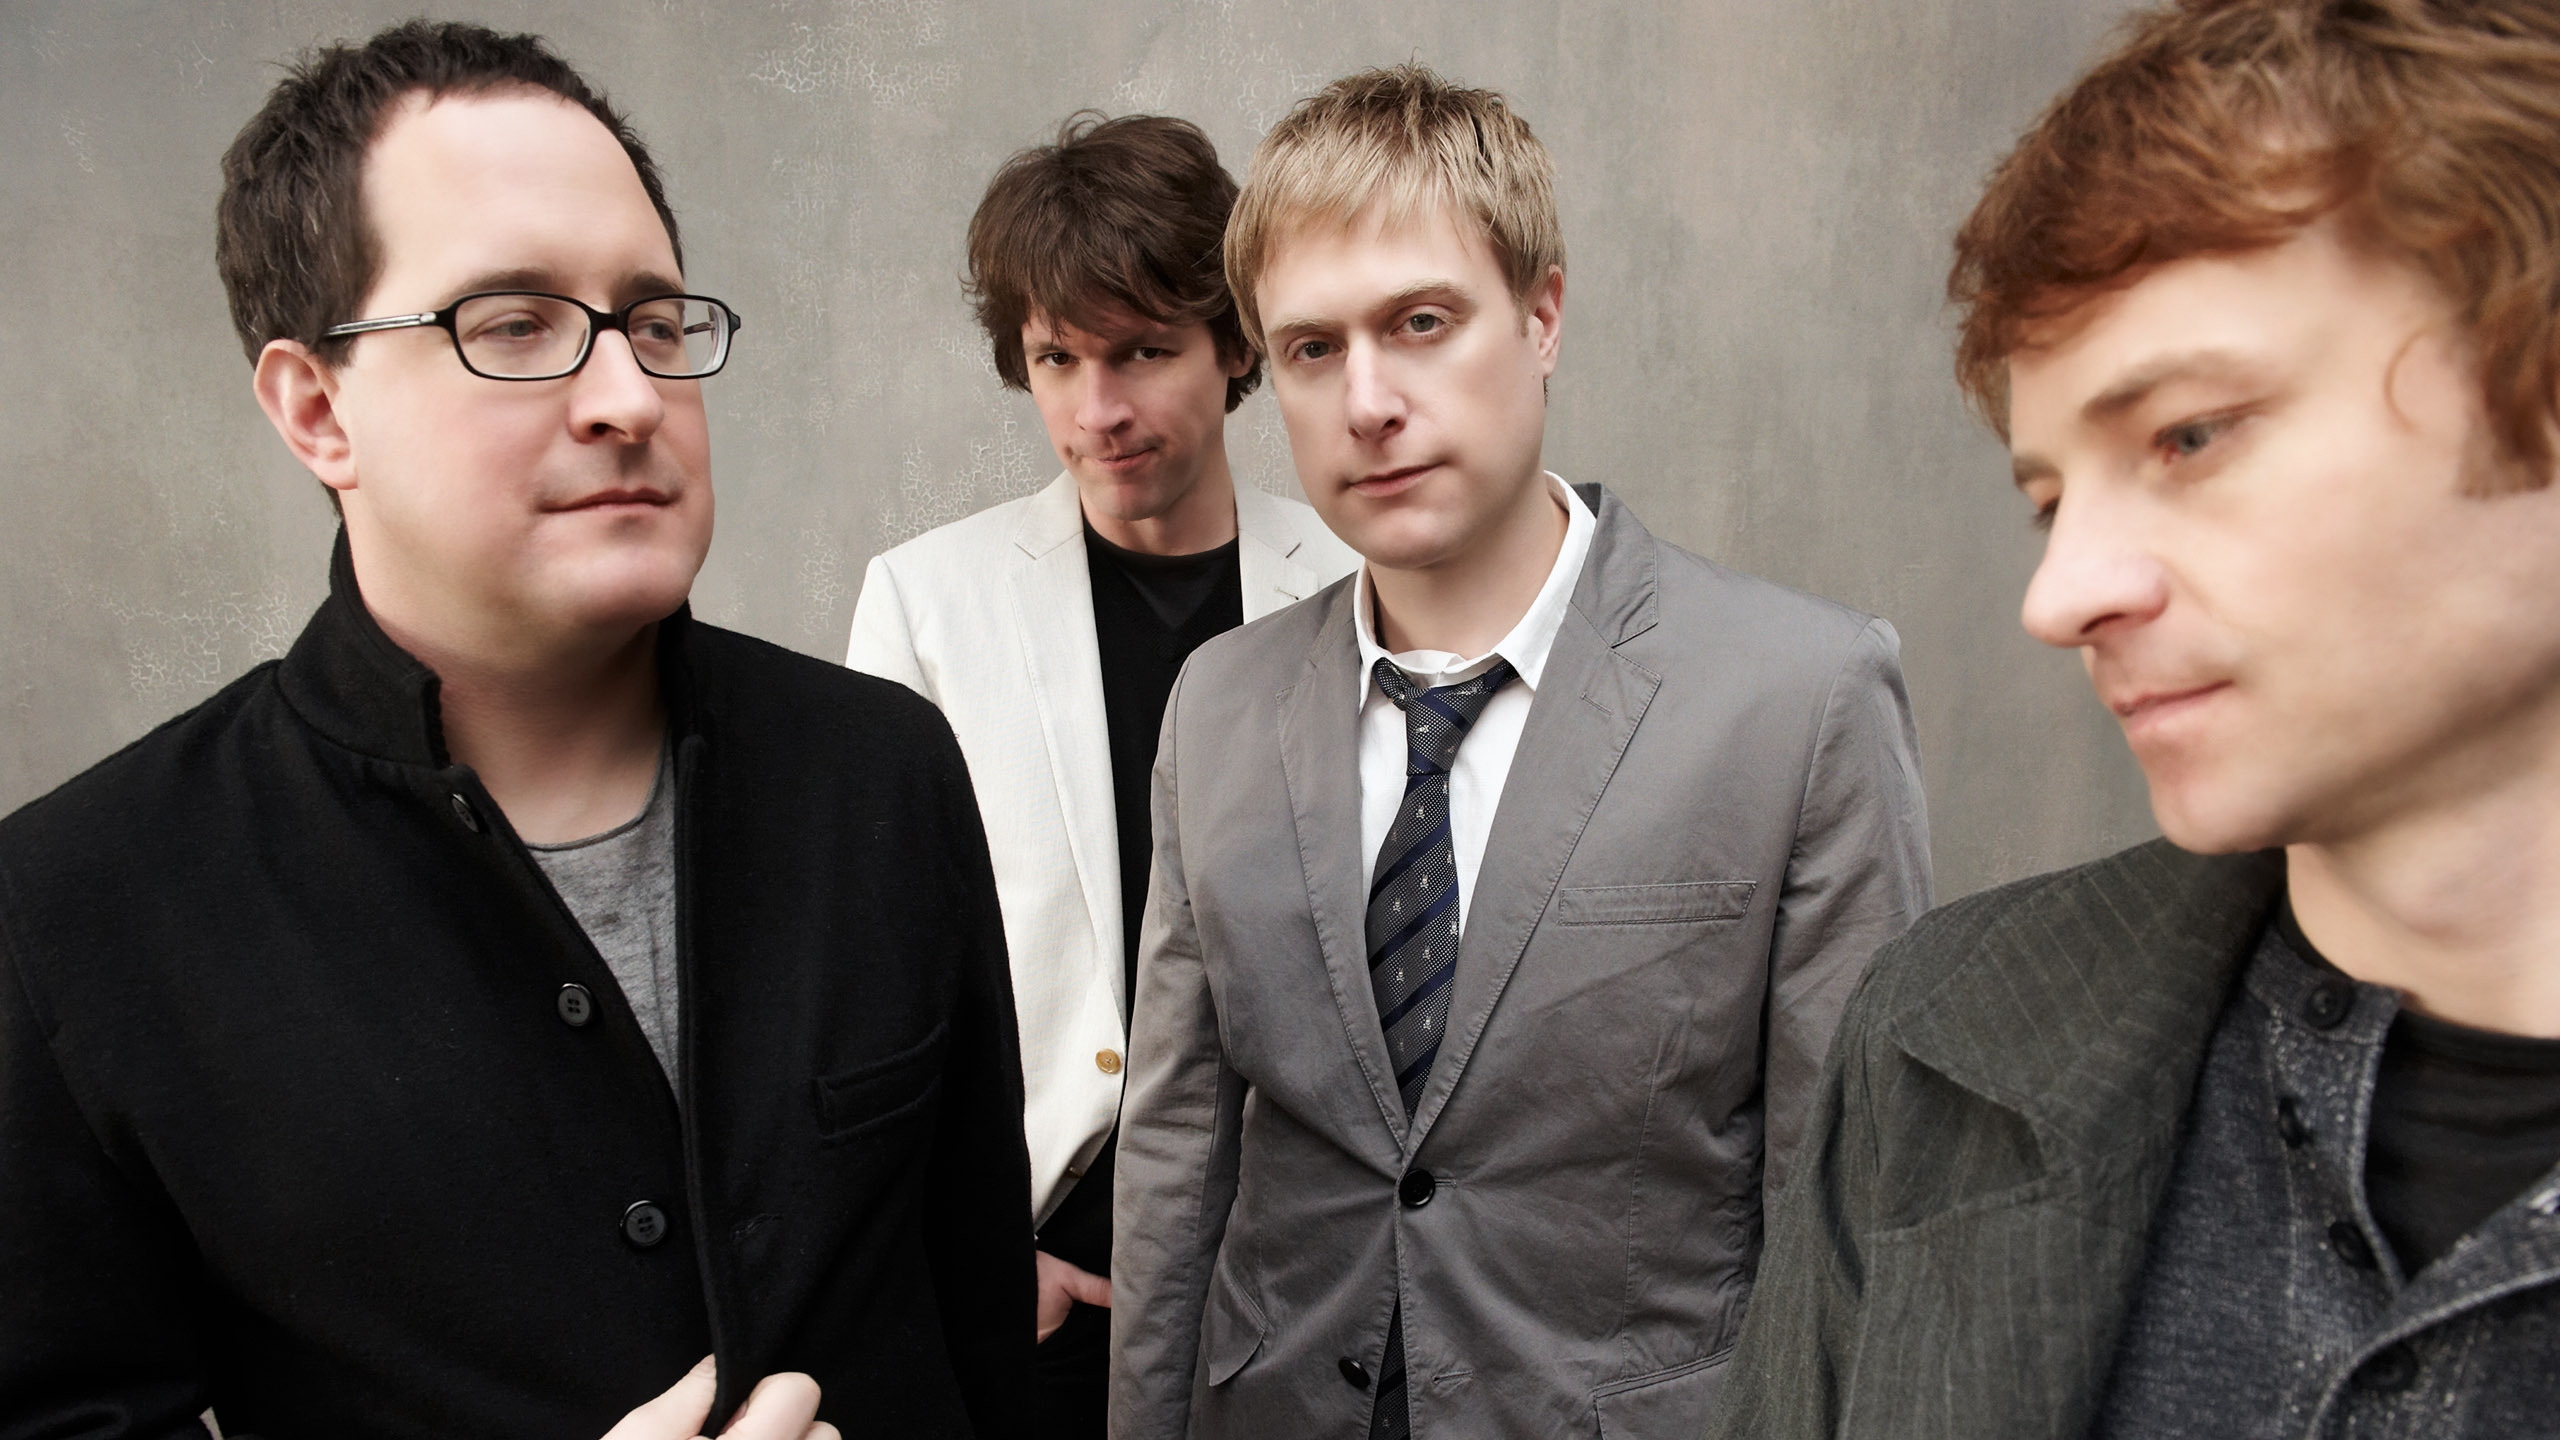 The Hold Steady for 2560x1440 HDTV resolution